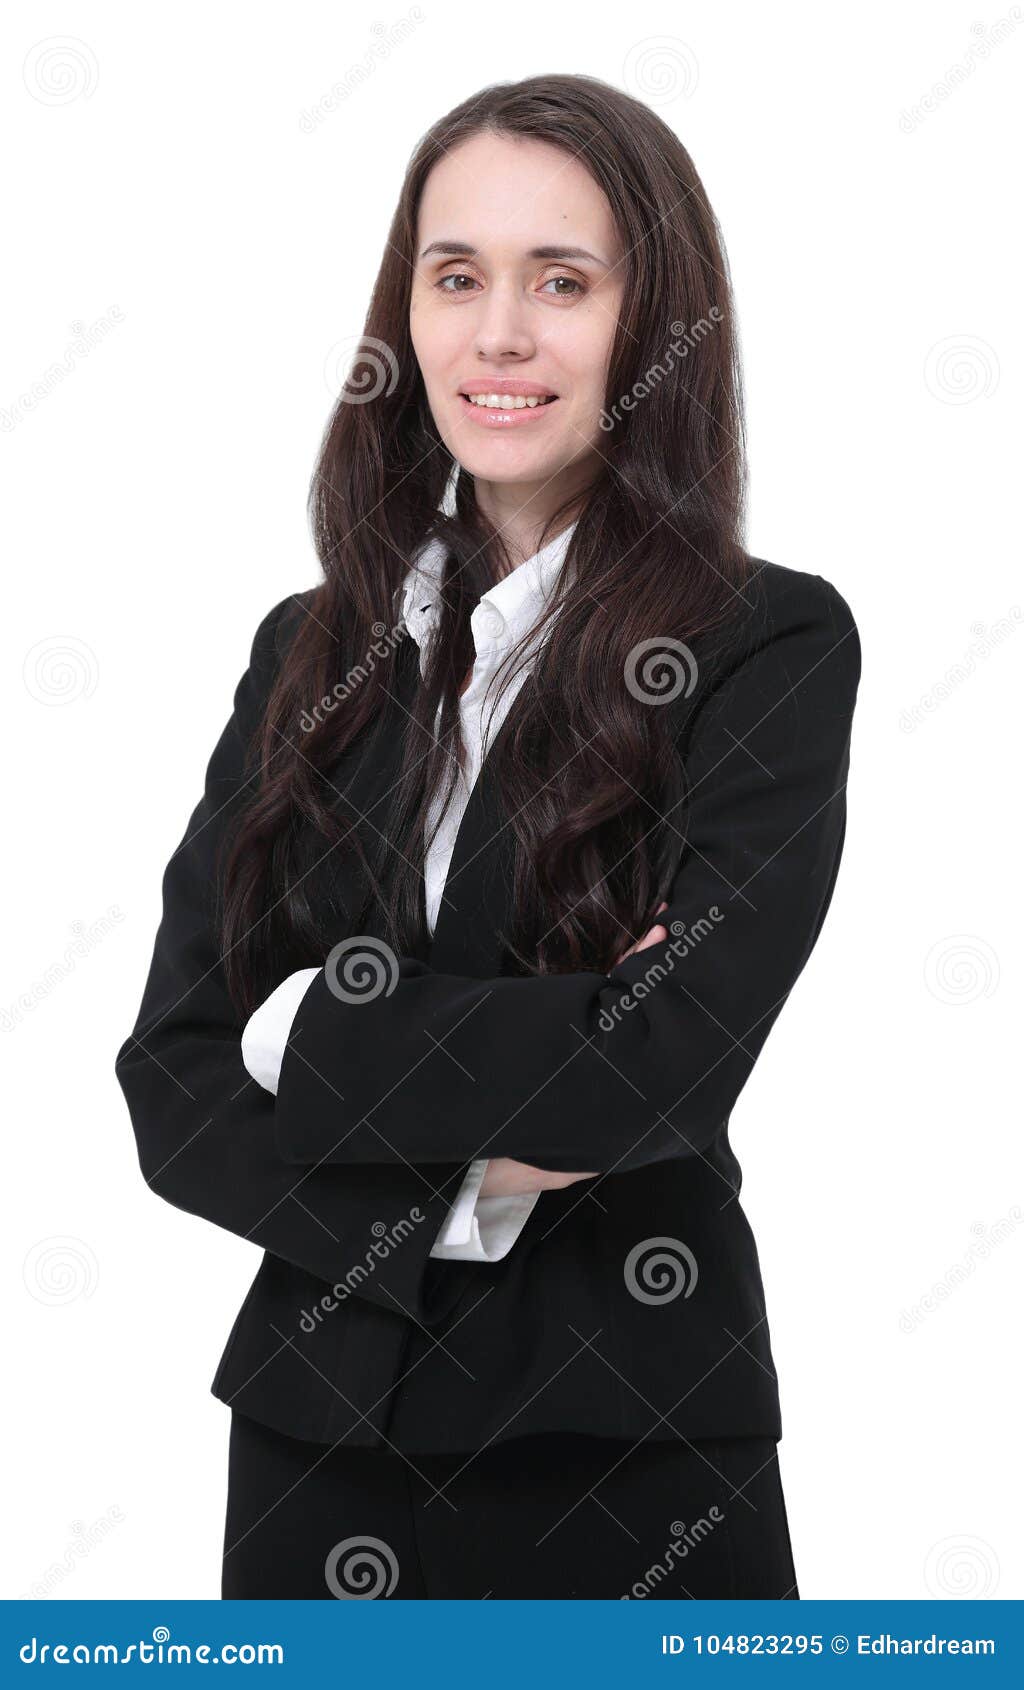 Portrait of a Woman Lawyer in a Business Suit Stock Image - Image of ...